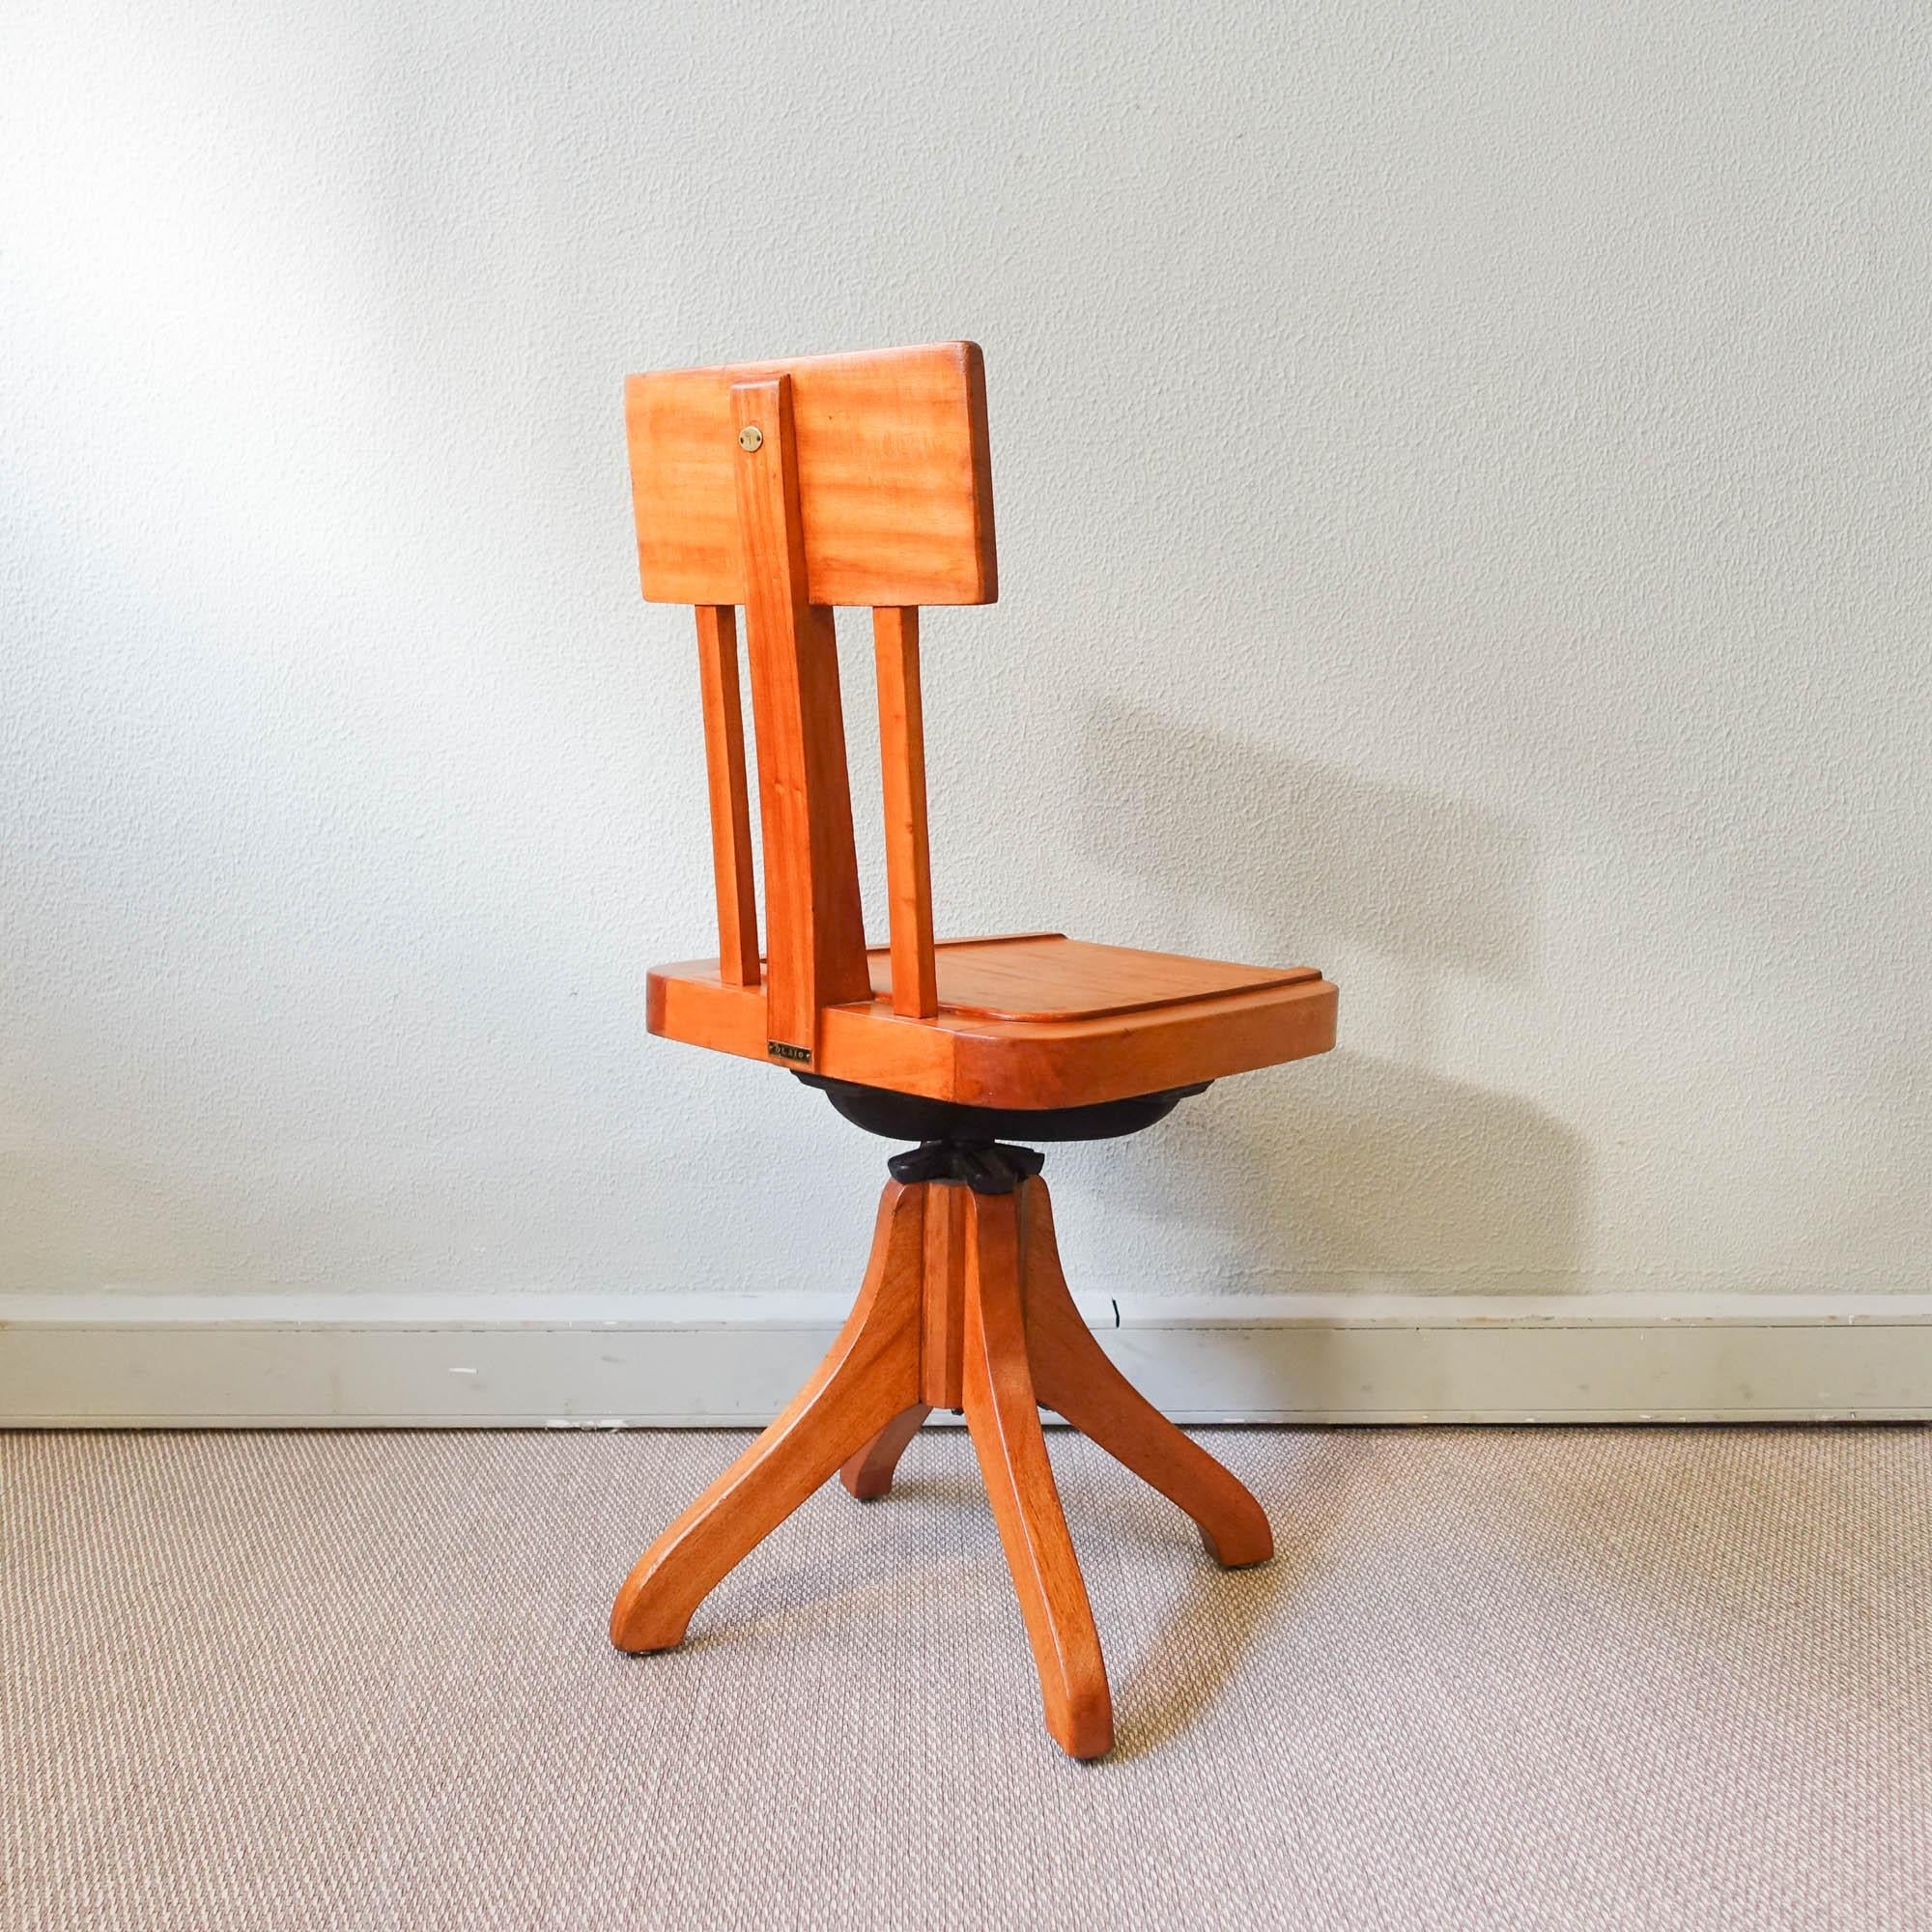 Typist Chair, Model Simples, by Móveis Olaio, 1940's In Good Condition For Sale In Lisboa, PT